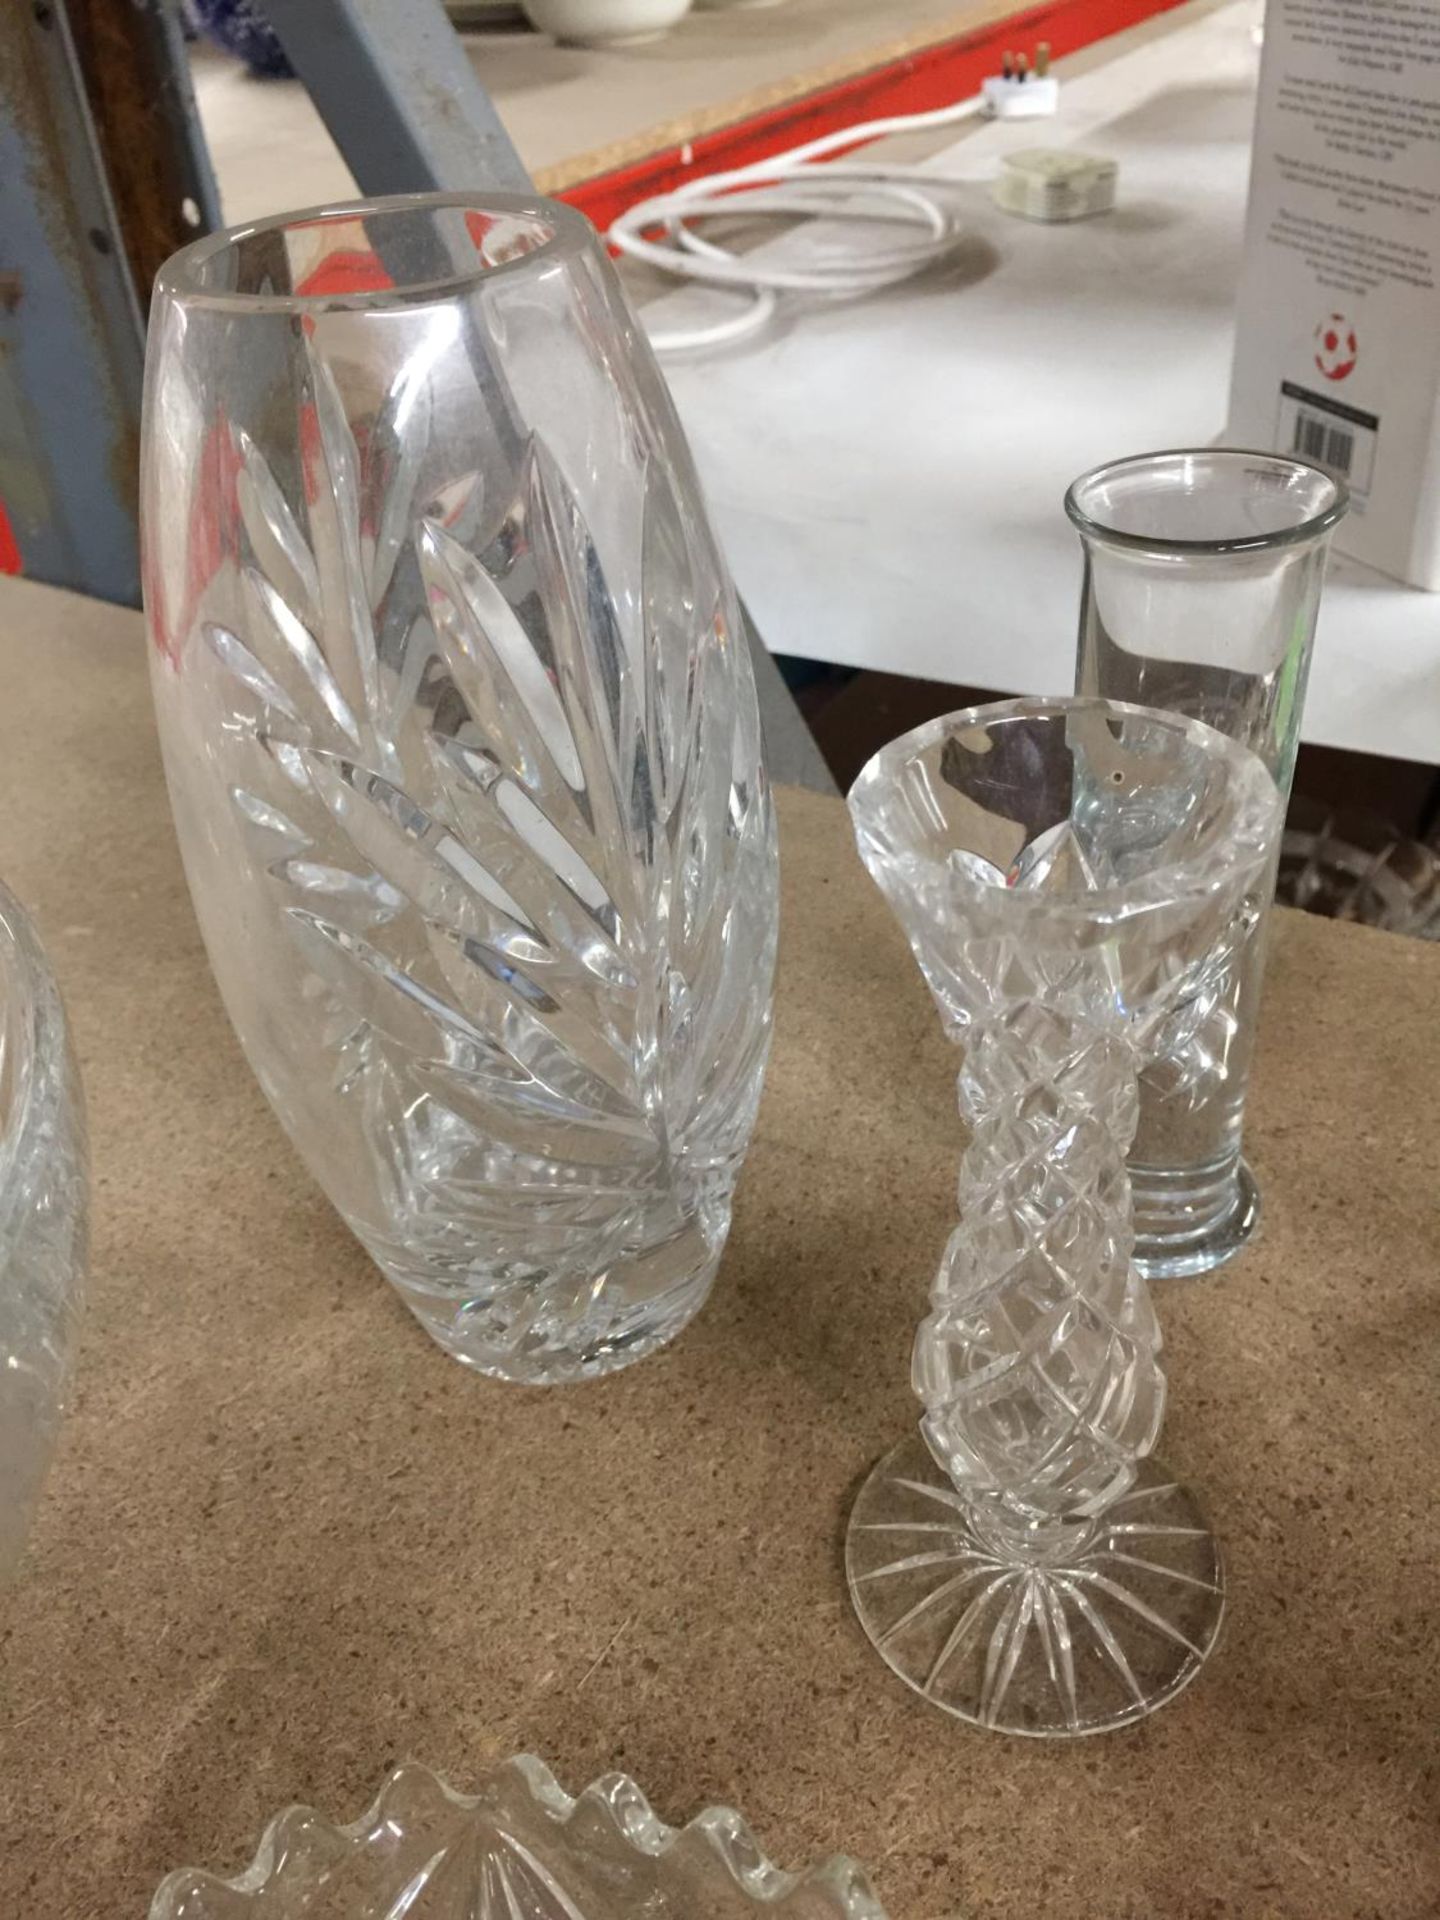 AN ASSORTMENT OF GLASSWARE TO INCLUDE DECANTERS, BOWLS, VASES, GLASSES, ETC - Image 6 of 7